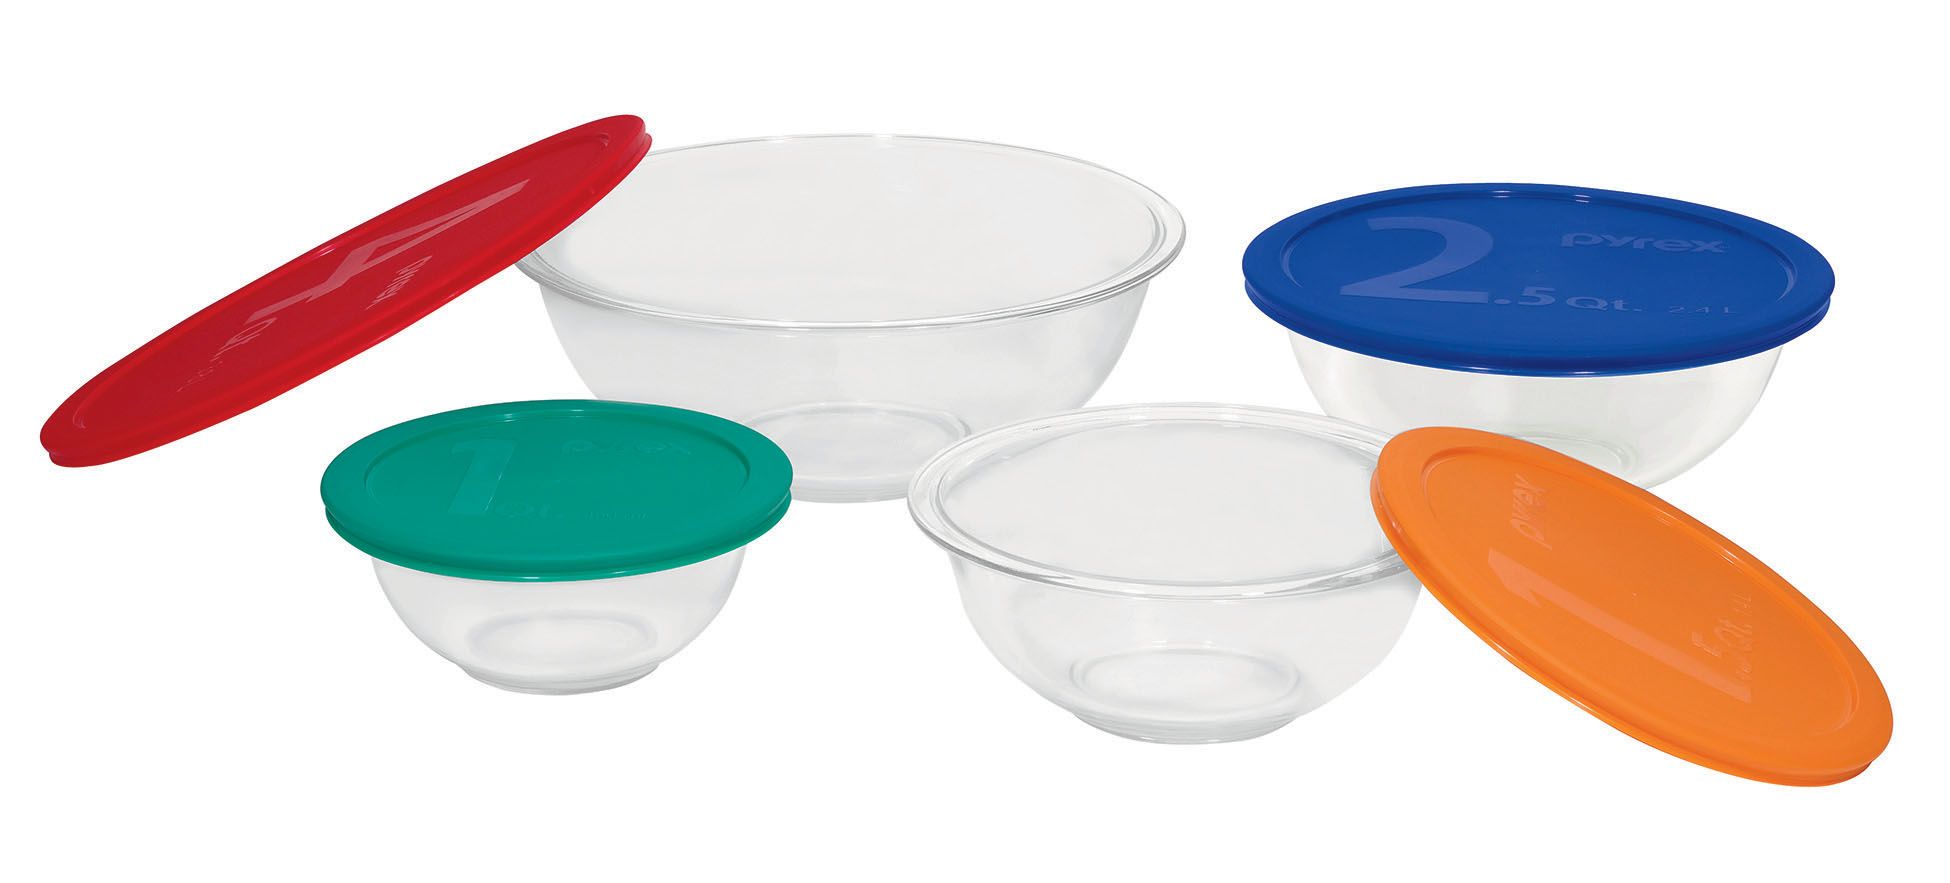 Pyrex 8-Piece Mixing Bowl Set with Colored Lids, Created for